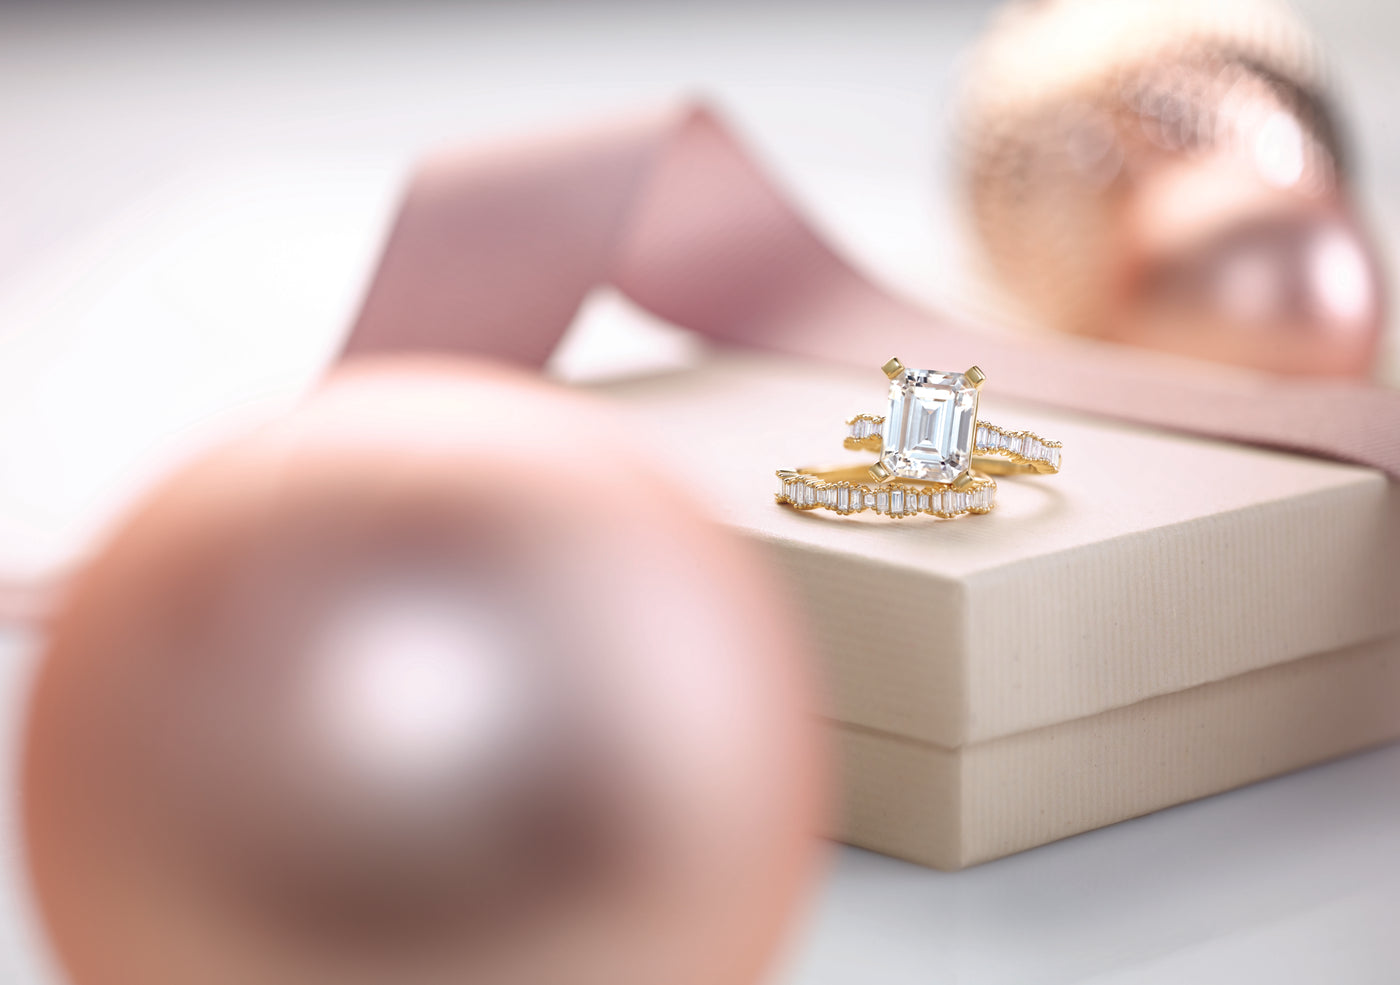 Sparkle in the Season: The Case for Holiday Engagements and Where to Find Your Perfect Ring